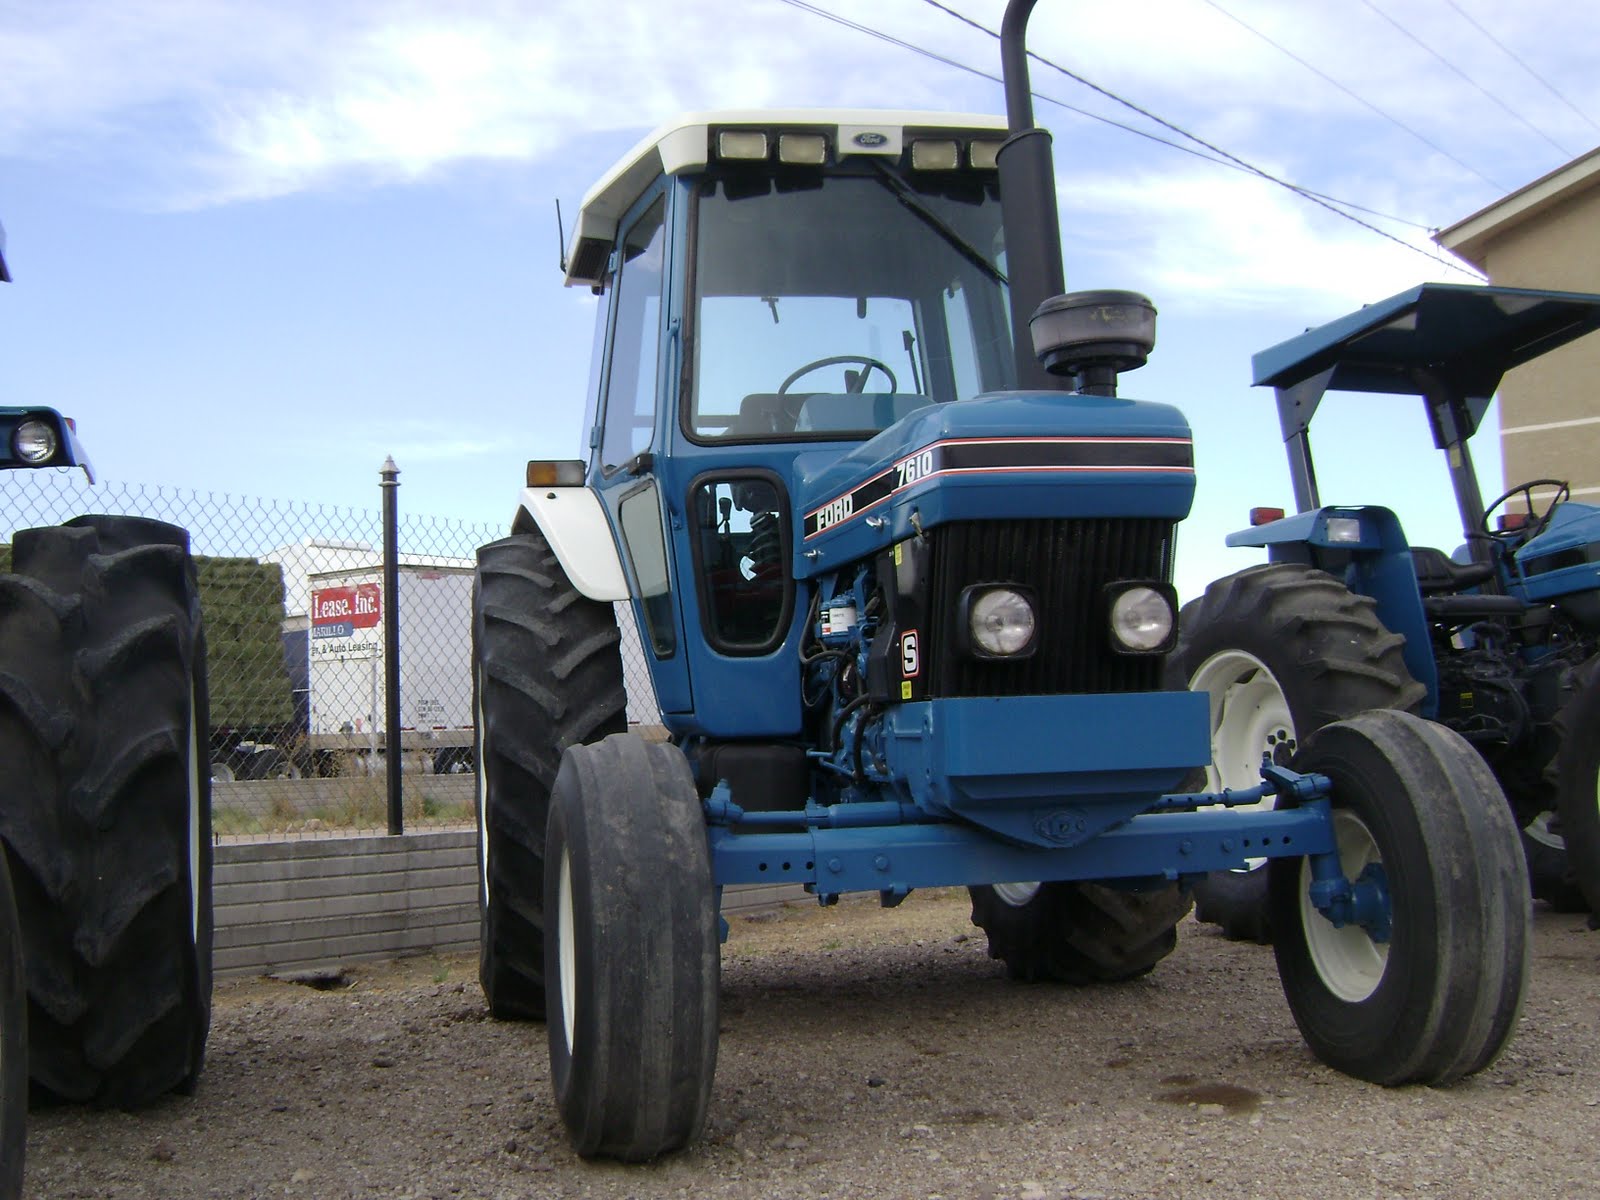 1986 7610 S Ford Tractor http://carpatys.com/ford-7610-tractor.html